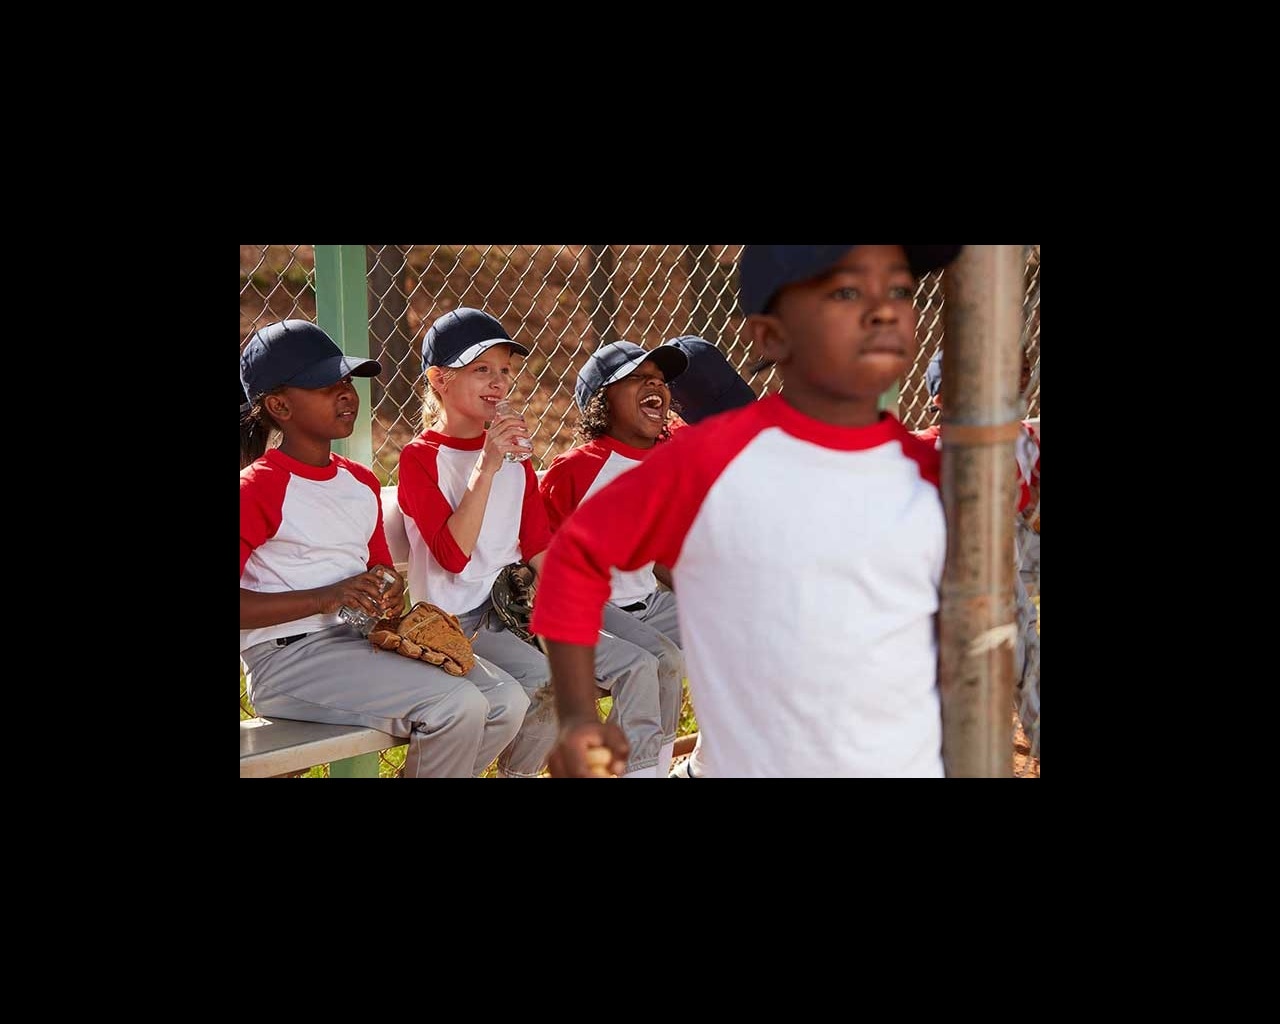 Mixed race group of young children laughing together in a baseball dugout